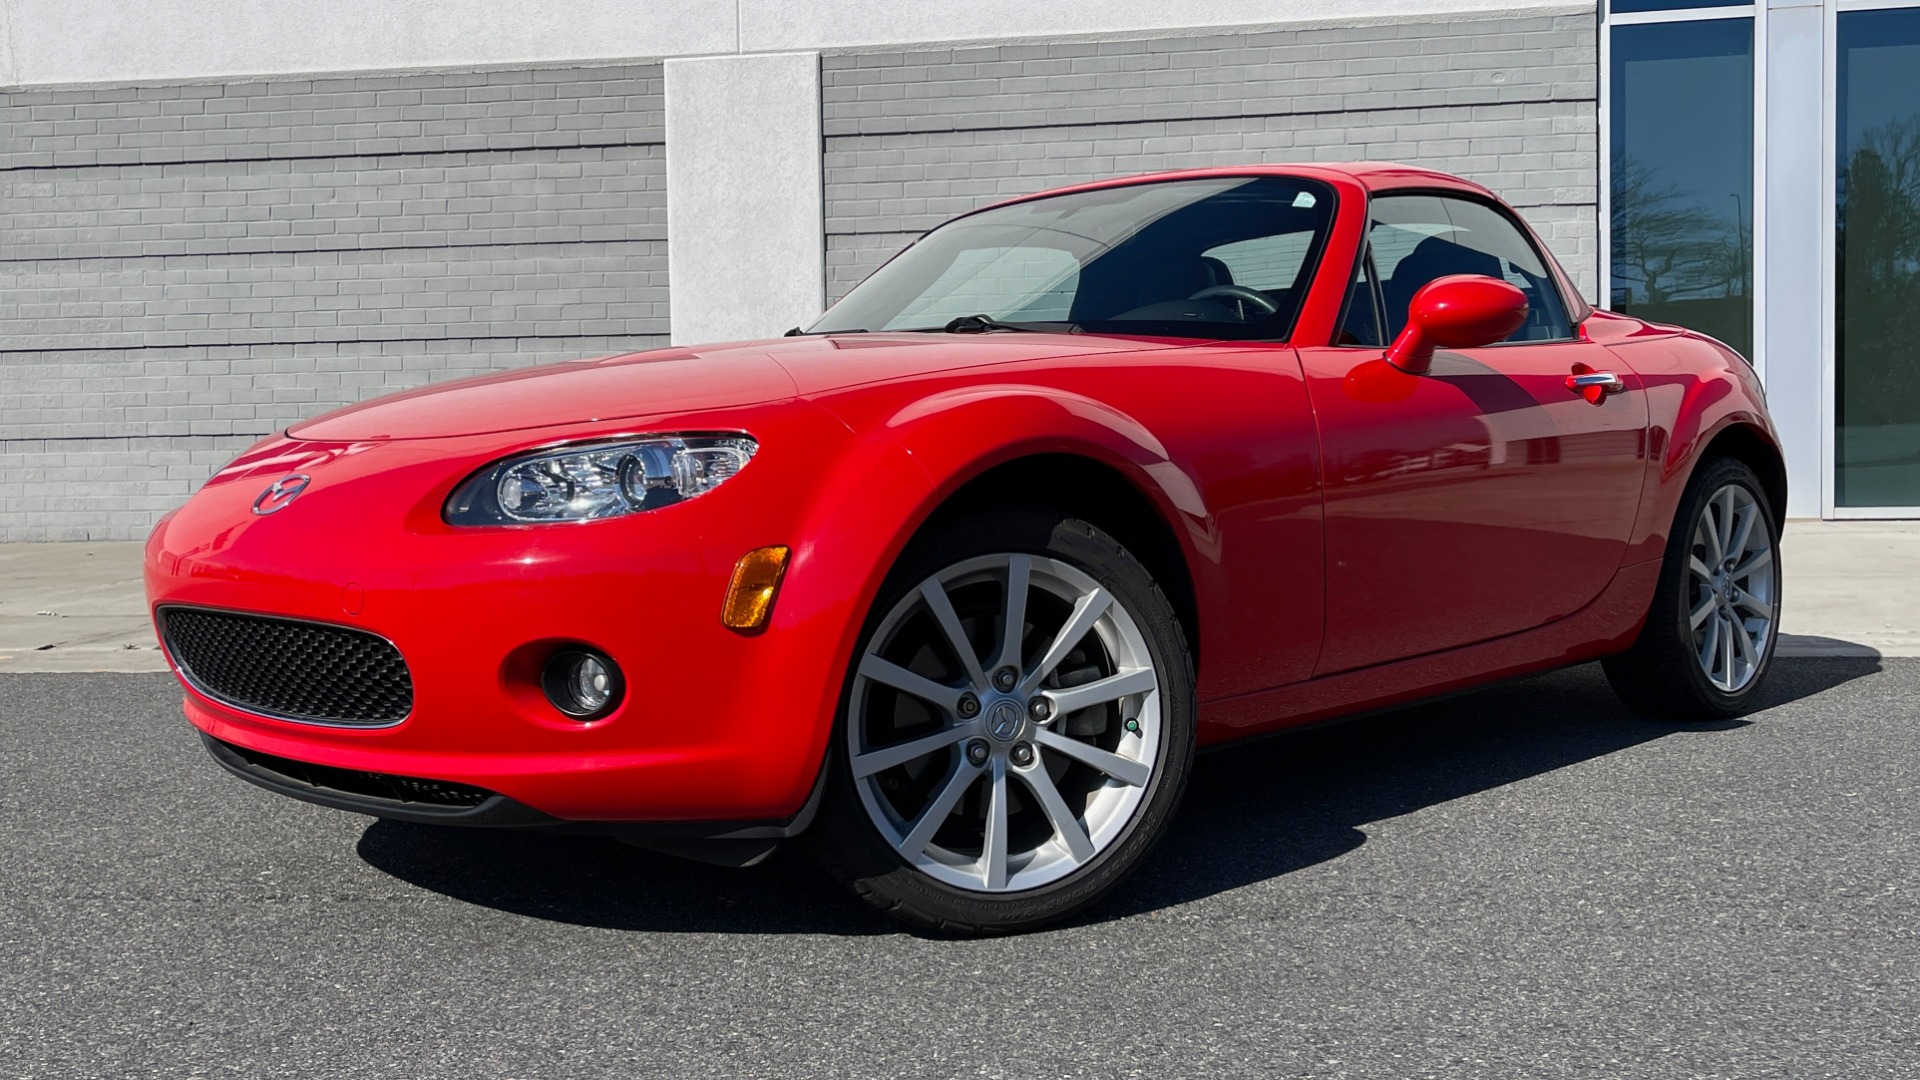 Used 2008 Mazda MX-5 MIATA GRAND TOURING / PRHT 2DR / MANUAL / 17IN ALLOY WHLS / LOW MILES for sale $20,995 at Formula Imports in Charlotte NC 28227 4